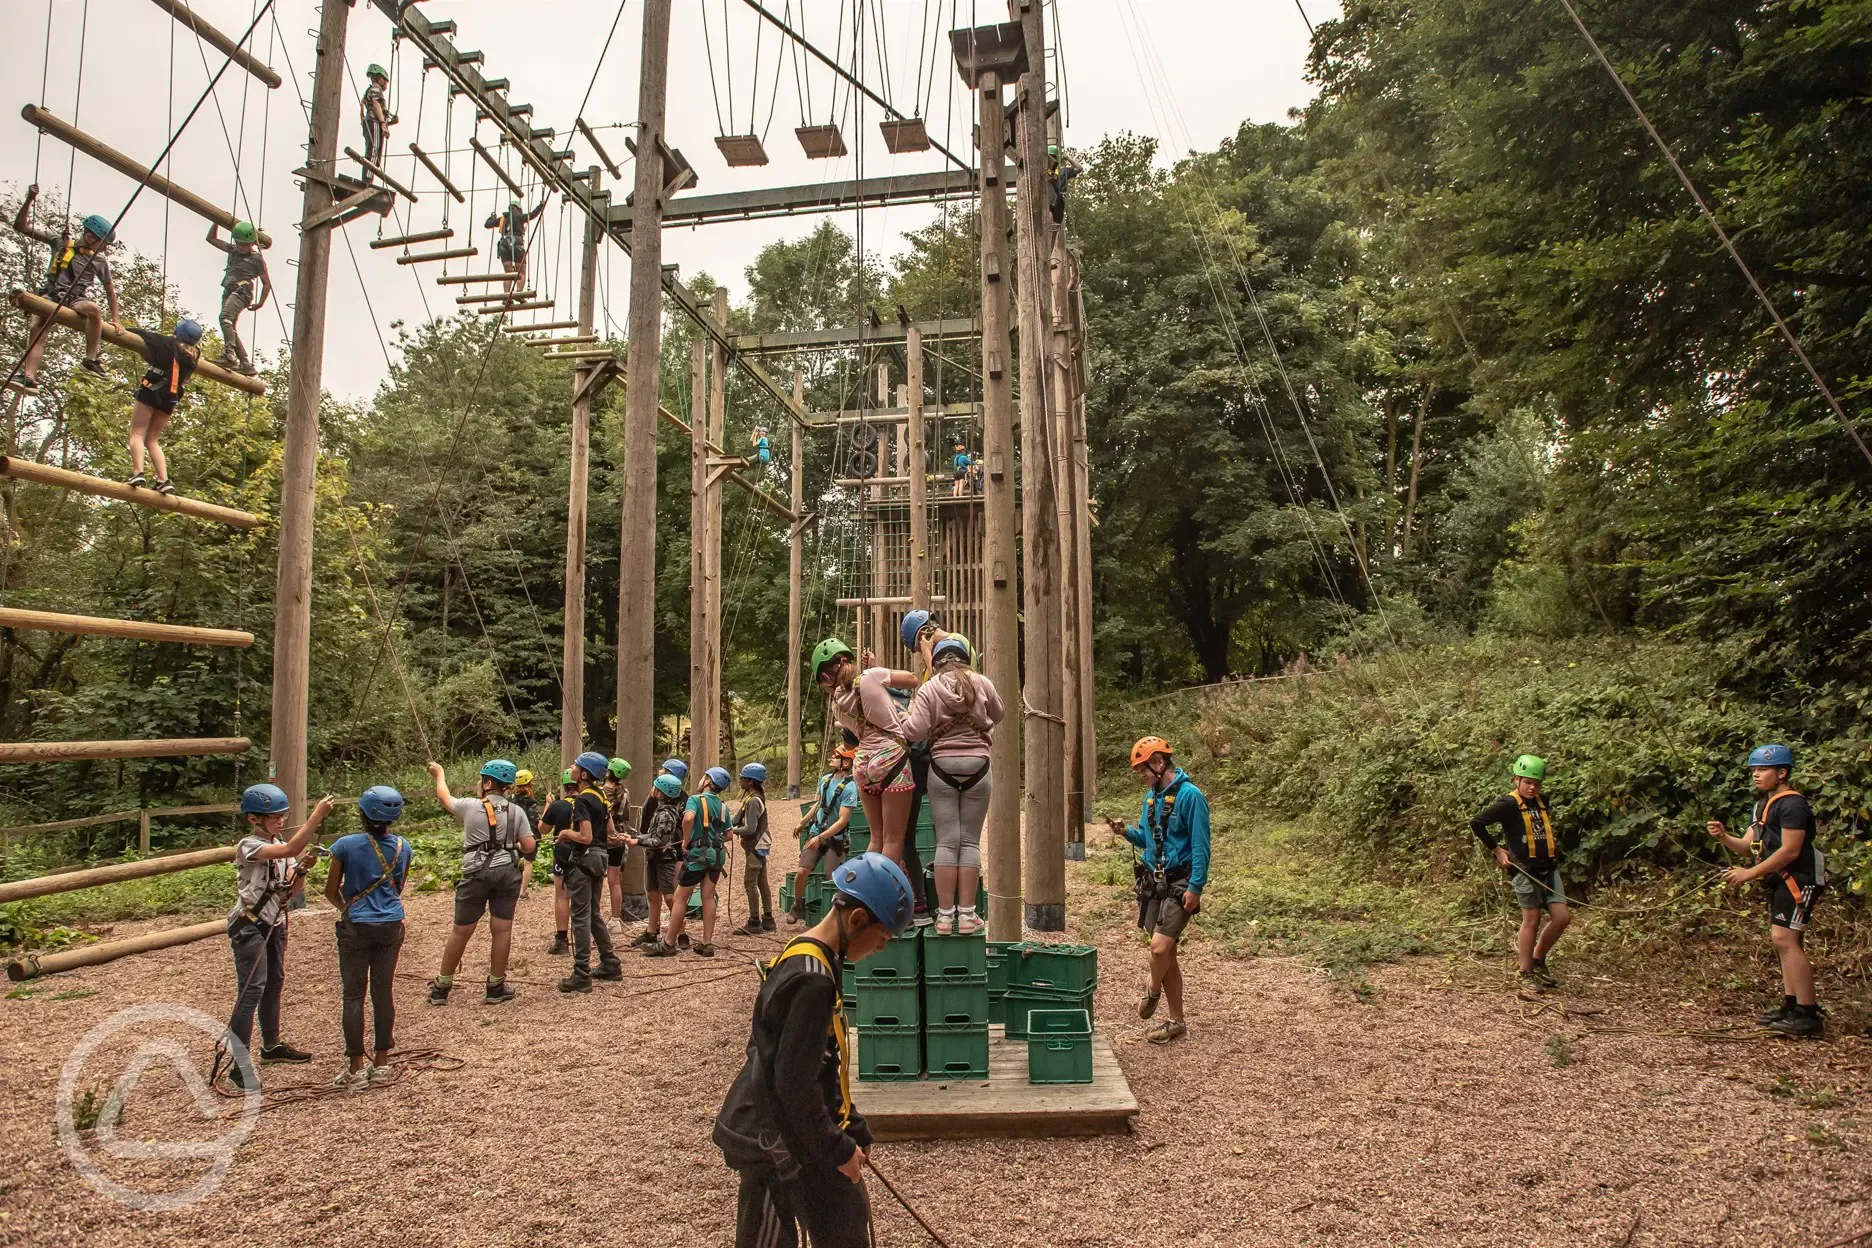 High ropes course